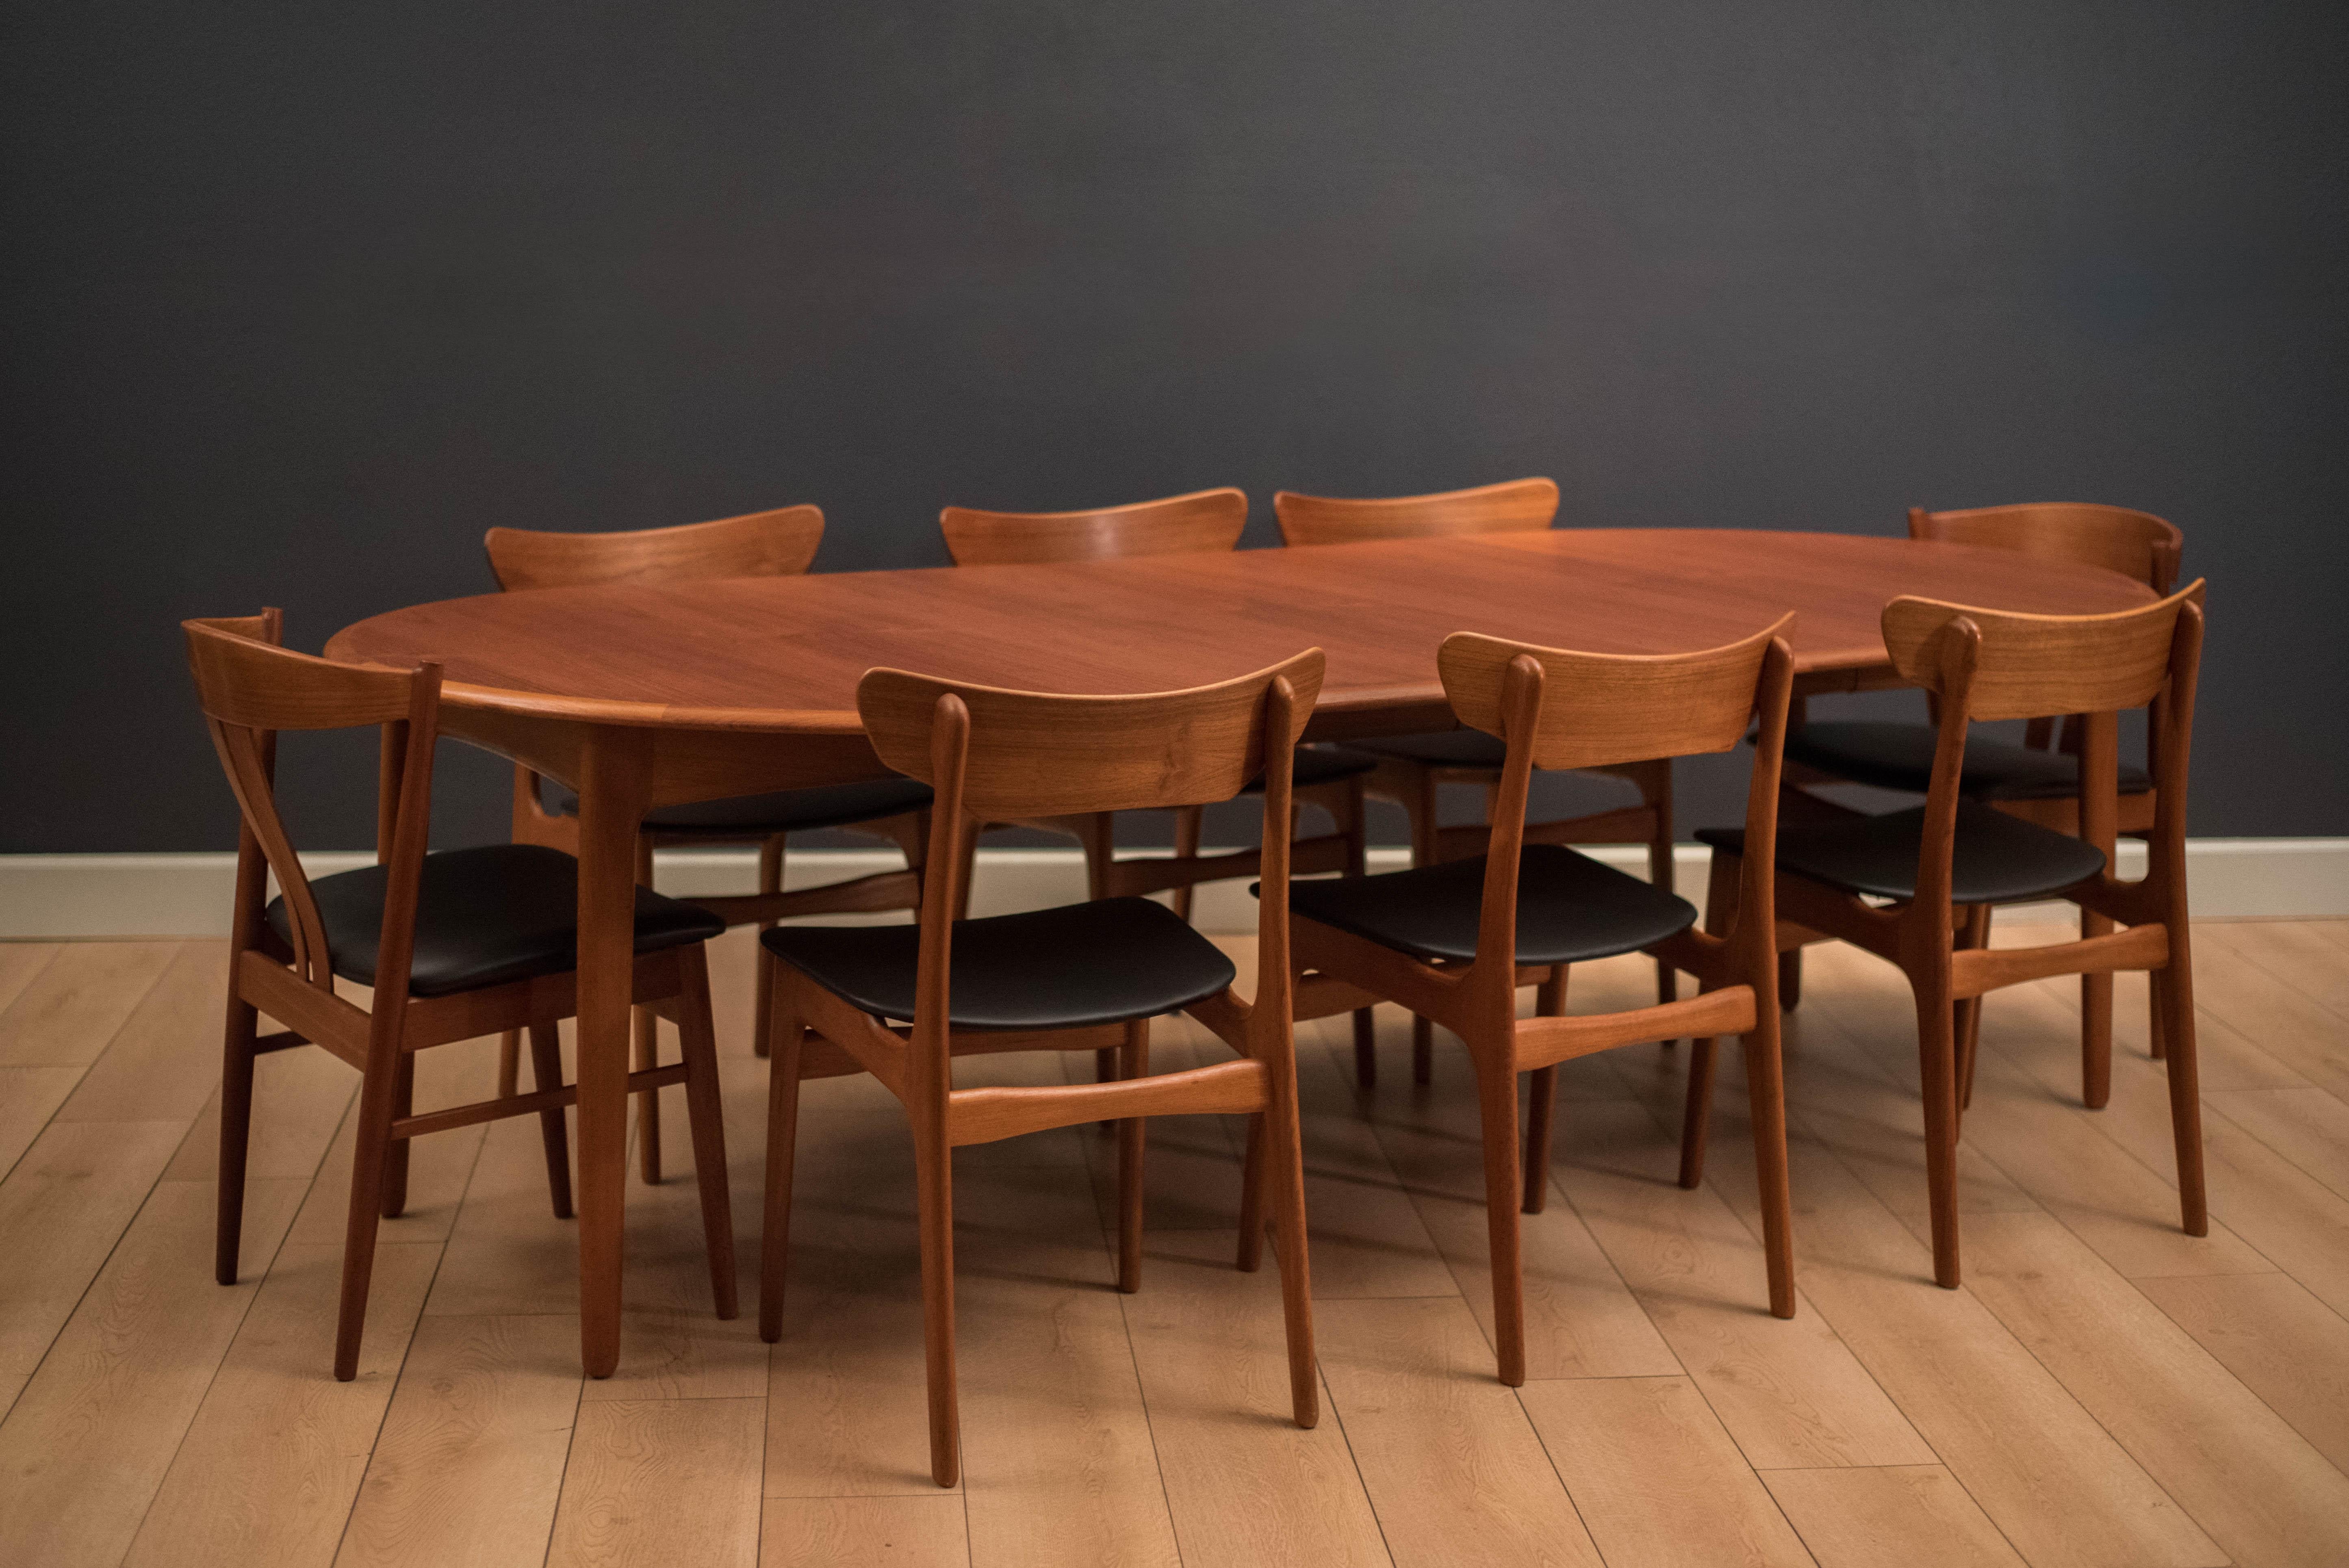 Vintage mid century round dining table designed by Svend Aage Madsen in teak. This piece features opposing solid teak edge banding and unique angled tapered legs. Includes two separate leaves that extend to an oval tabletop to allow more